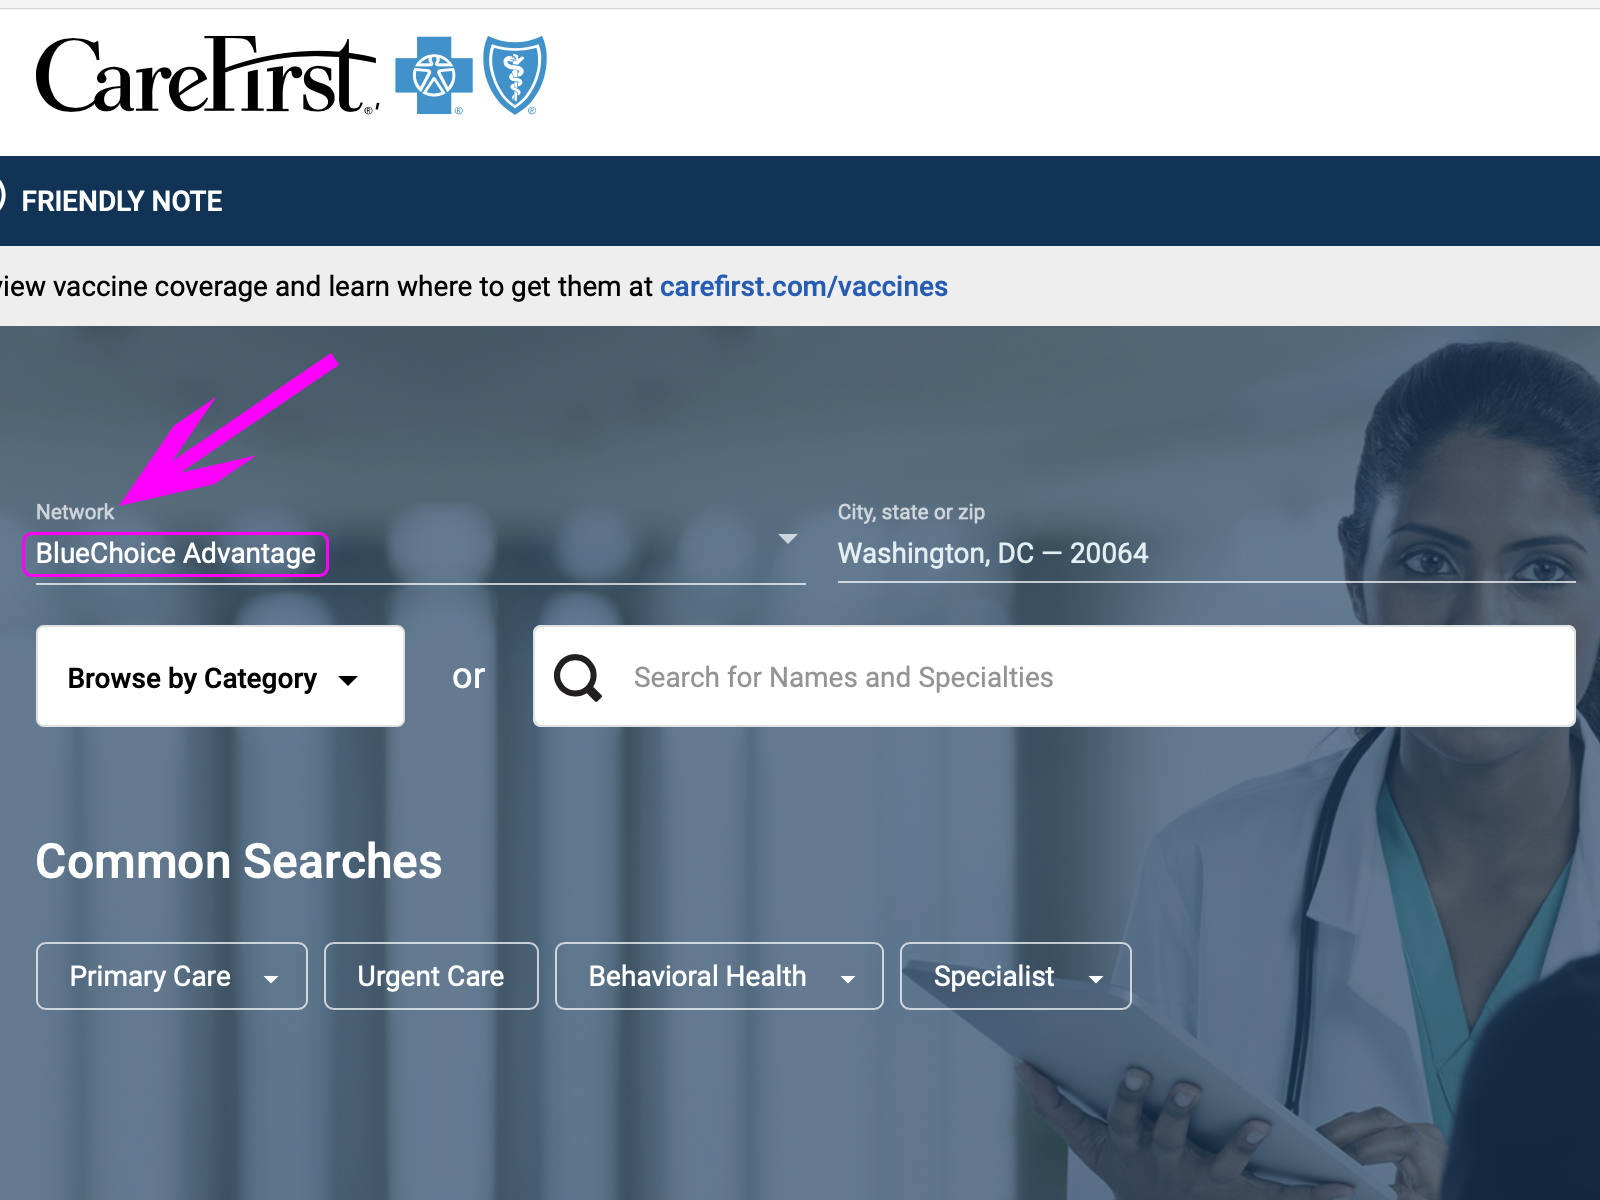 Screenshot of CareFirst website showing location of network field.